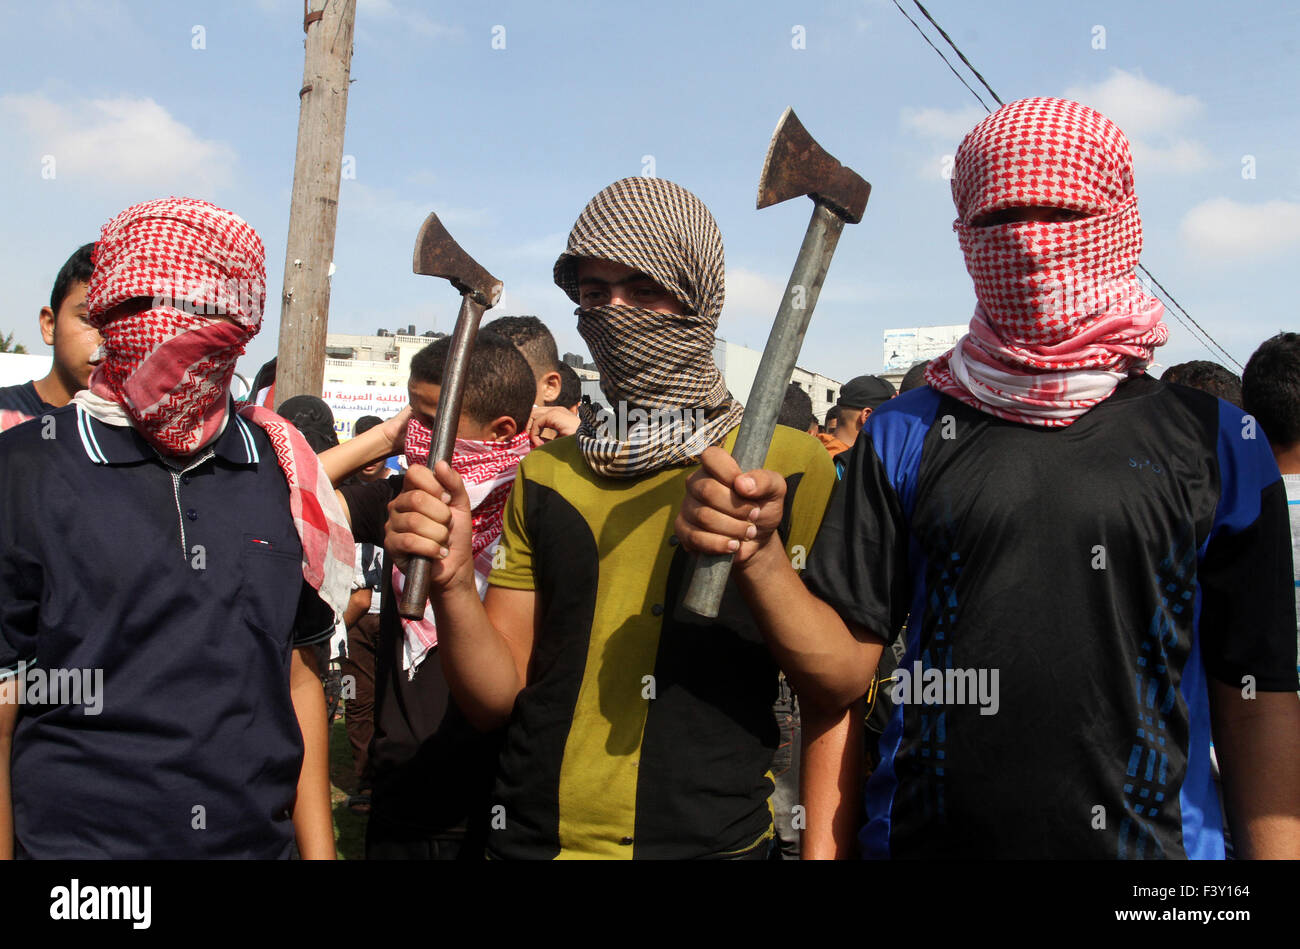 Rafah, Gaza Strip. 13th Oct, 2015. Palestinians hold axes during an anti-Israel protest in the southern Gaza Strip town of Rafah, as a wave of stabbings has hit Israel, Jerusalem and the West Bank along with violent protests. Warnings that a full-scale Palestinian uprising, or third intifada, could erupt. © Abed Rahim Khatib/APA Images/ZUMA Wire/Alamy Live News Stock Photo